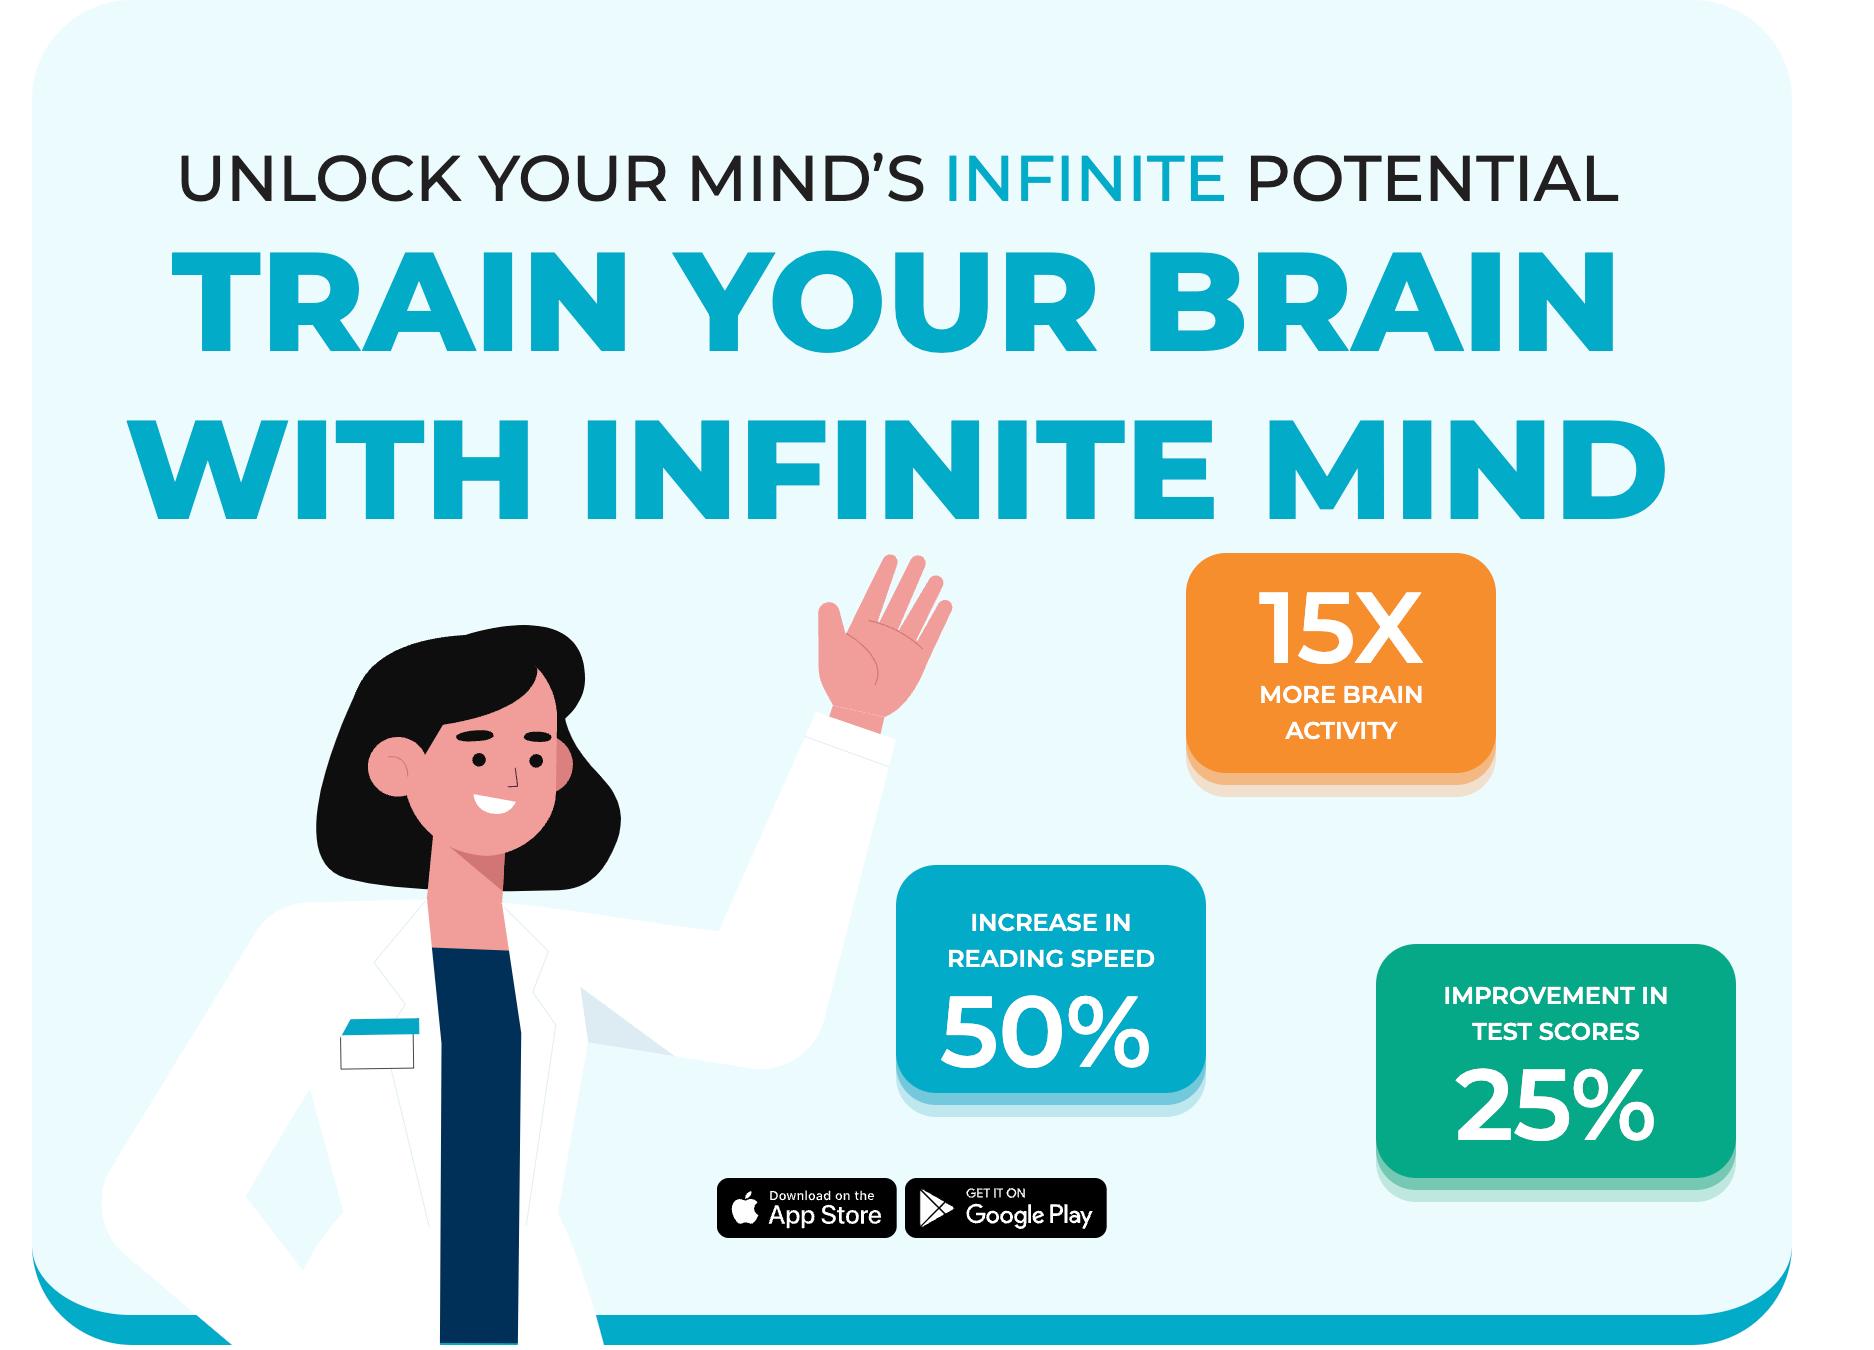 Train your brain with infinite mind and get 15x more brain activity, increase in reading speed 50% and improvement in test scores 25%